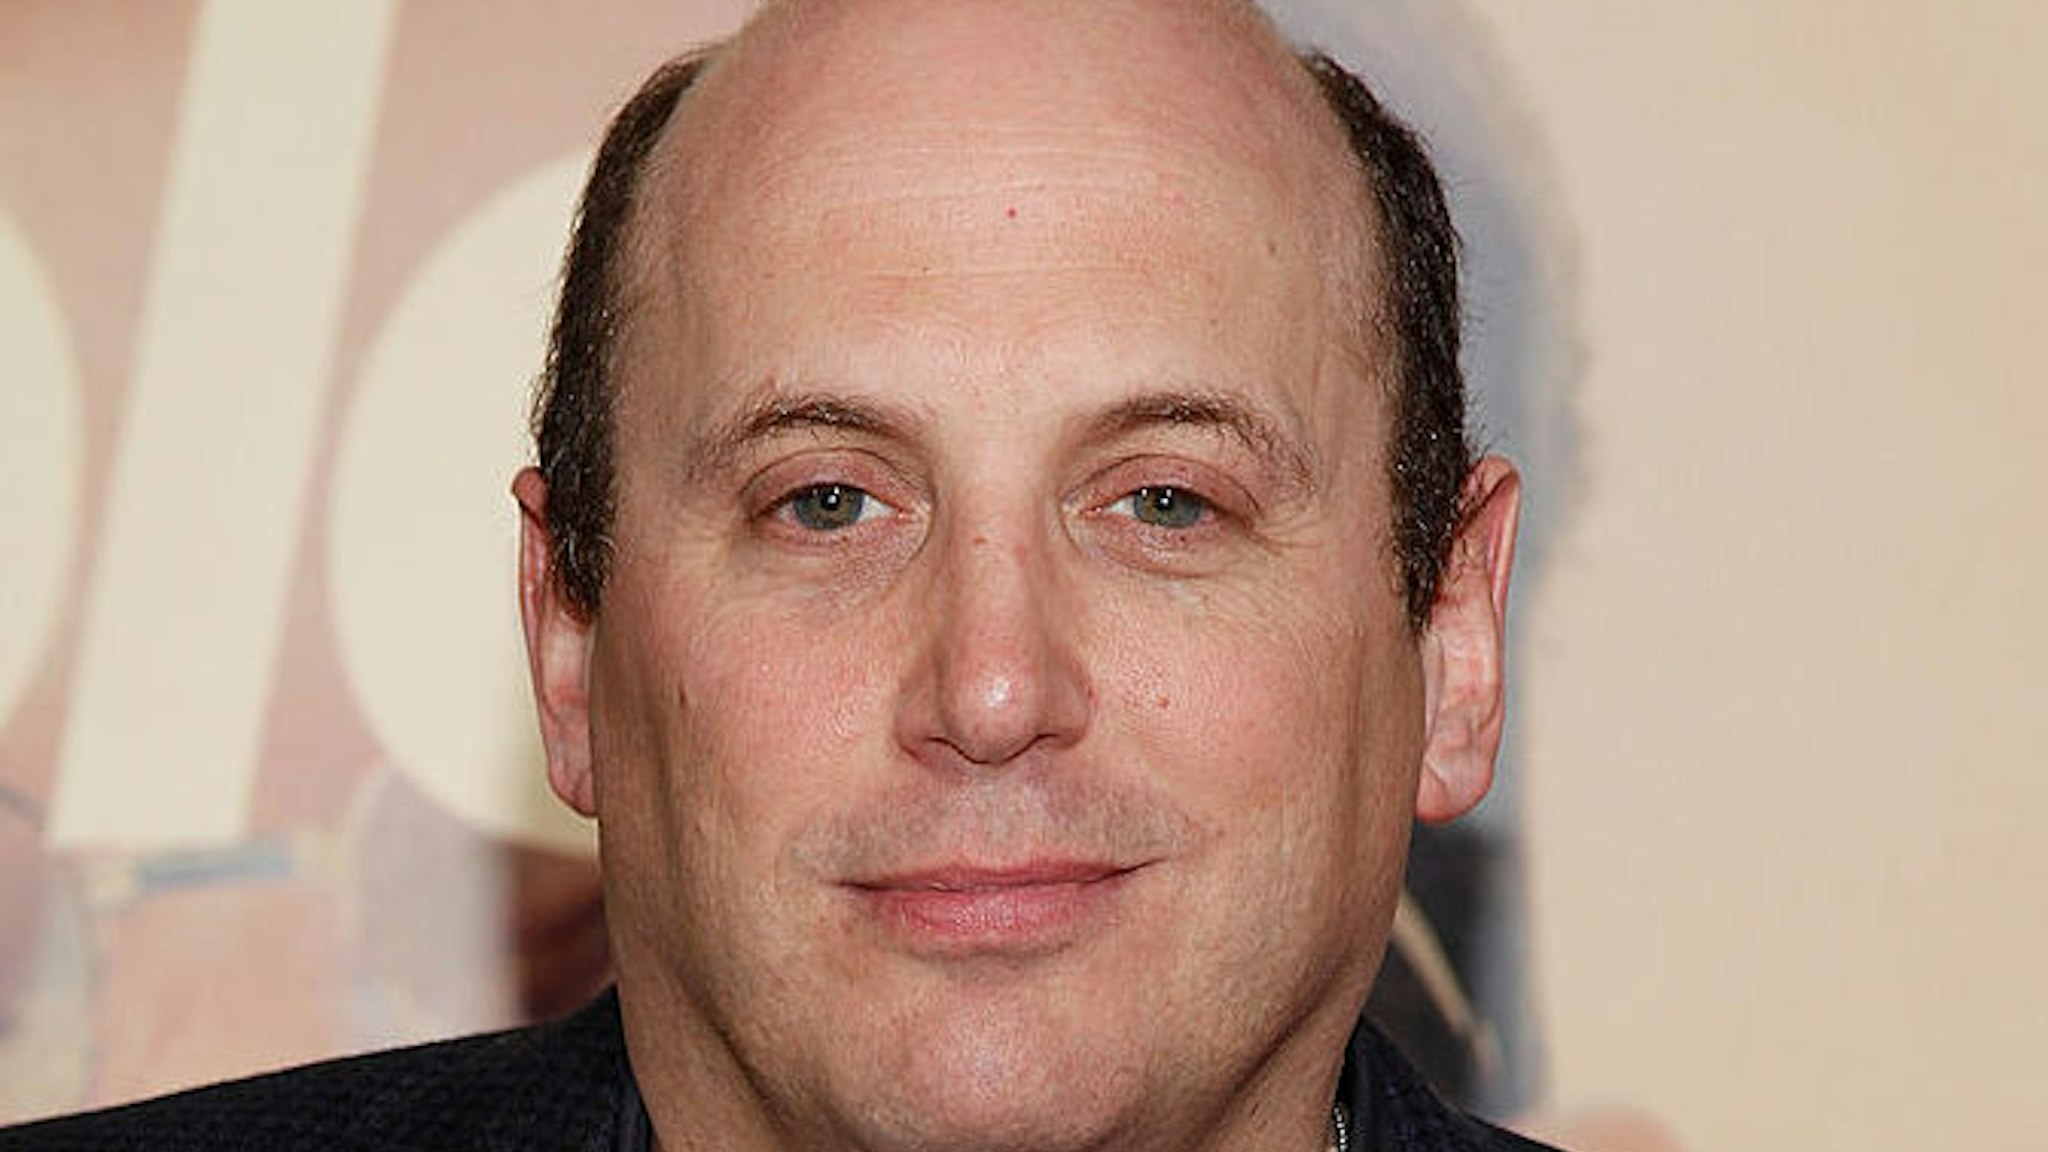 Writer Kurt Eichenwald attends the "The Informant" benefit screening at the Ziegfeld Theatre on September 15, 2009 in New York City.